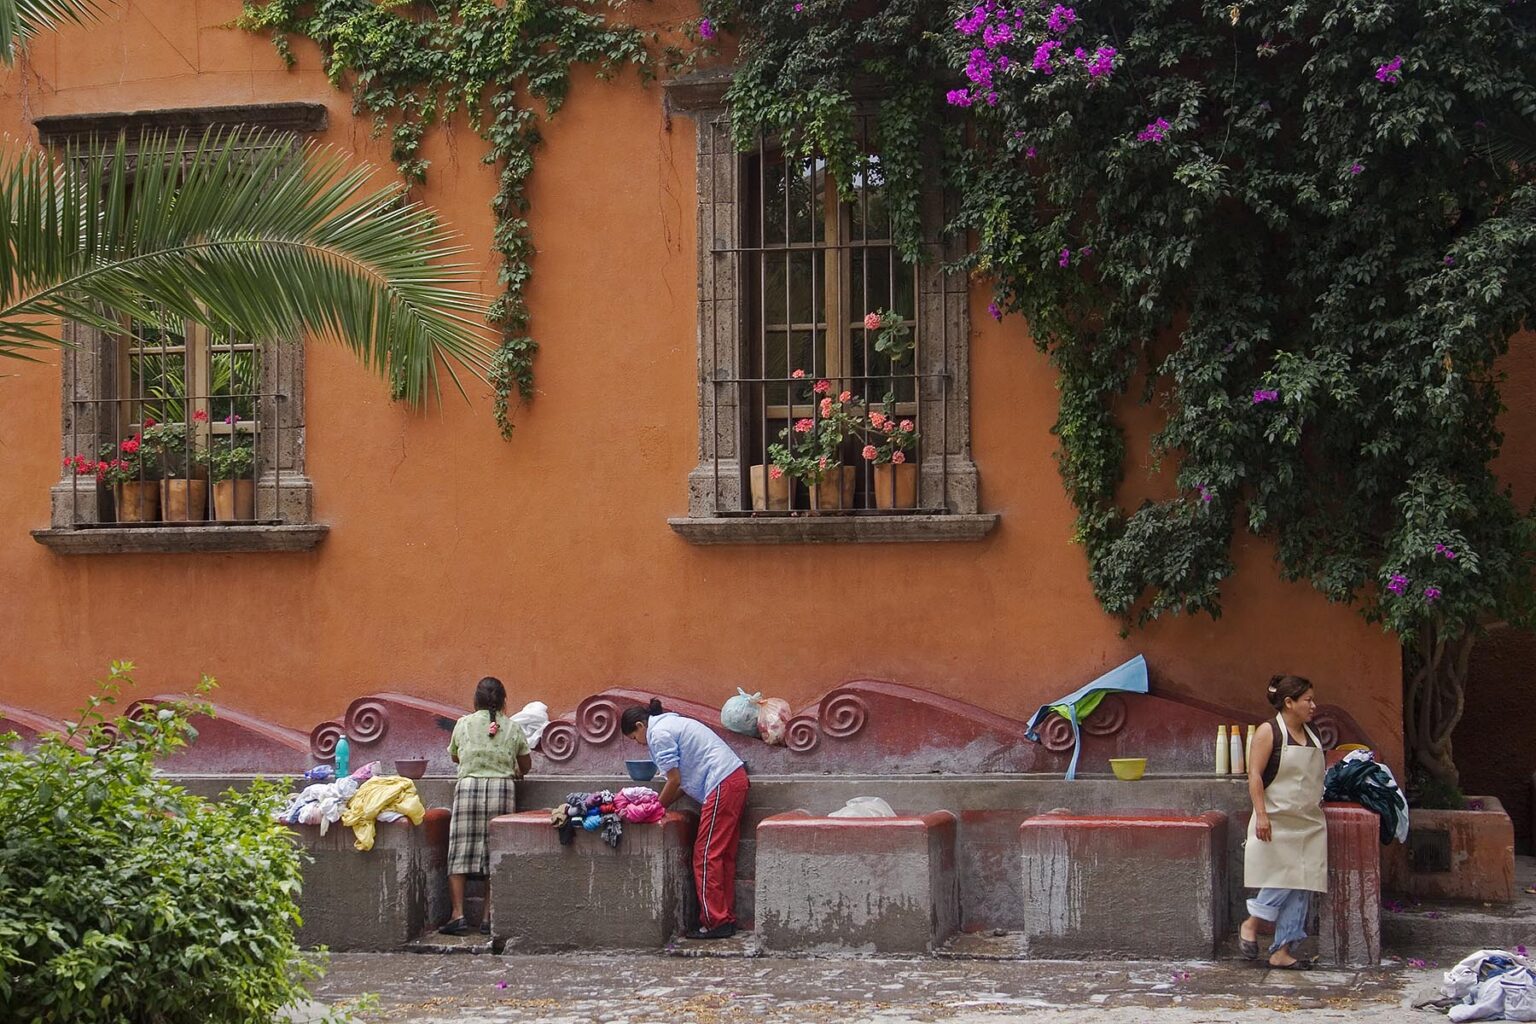 Mexican women still use the historic outdoor washing area to do their laundry in San Miguel de Allende - MEXICO